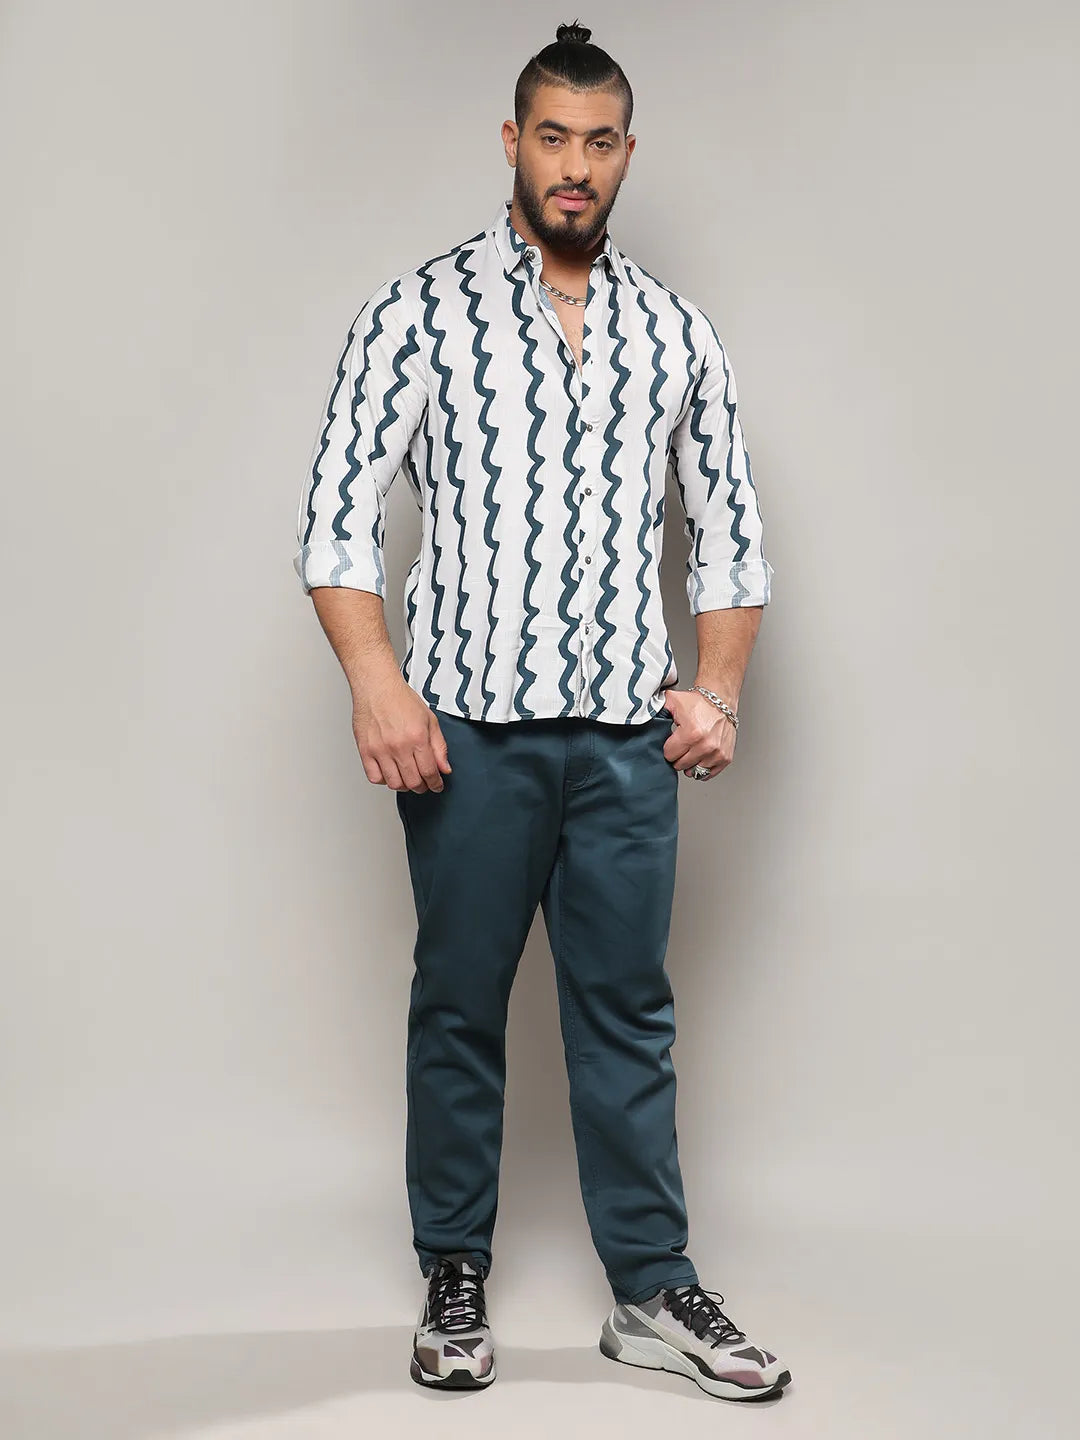 White & Navy Blue Contrast Paint Lines Shirt